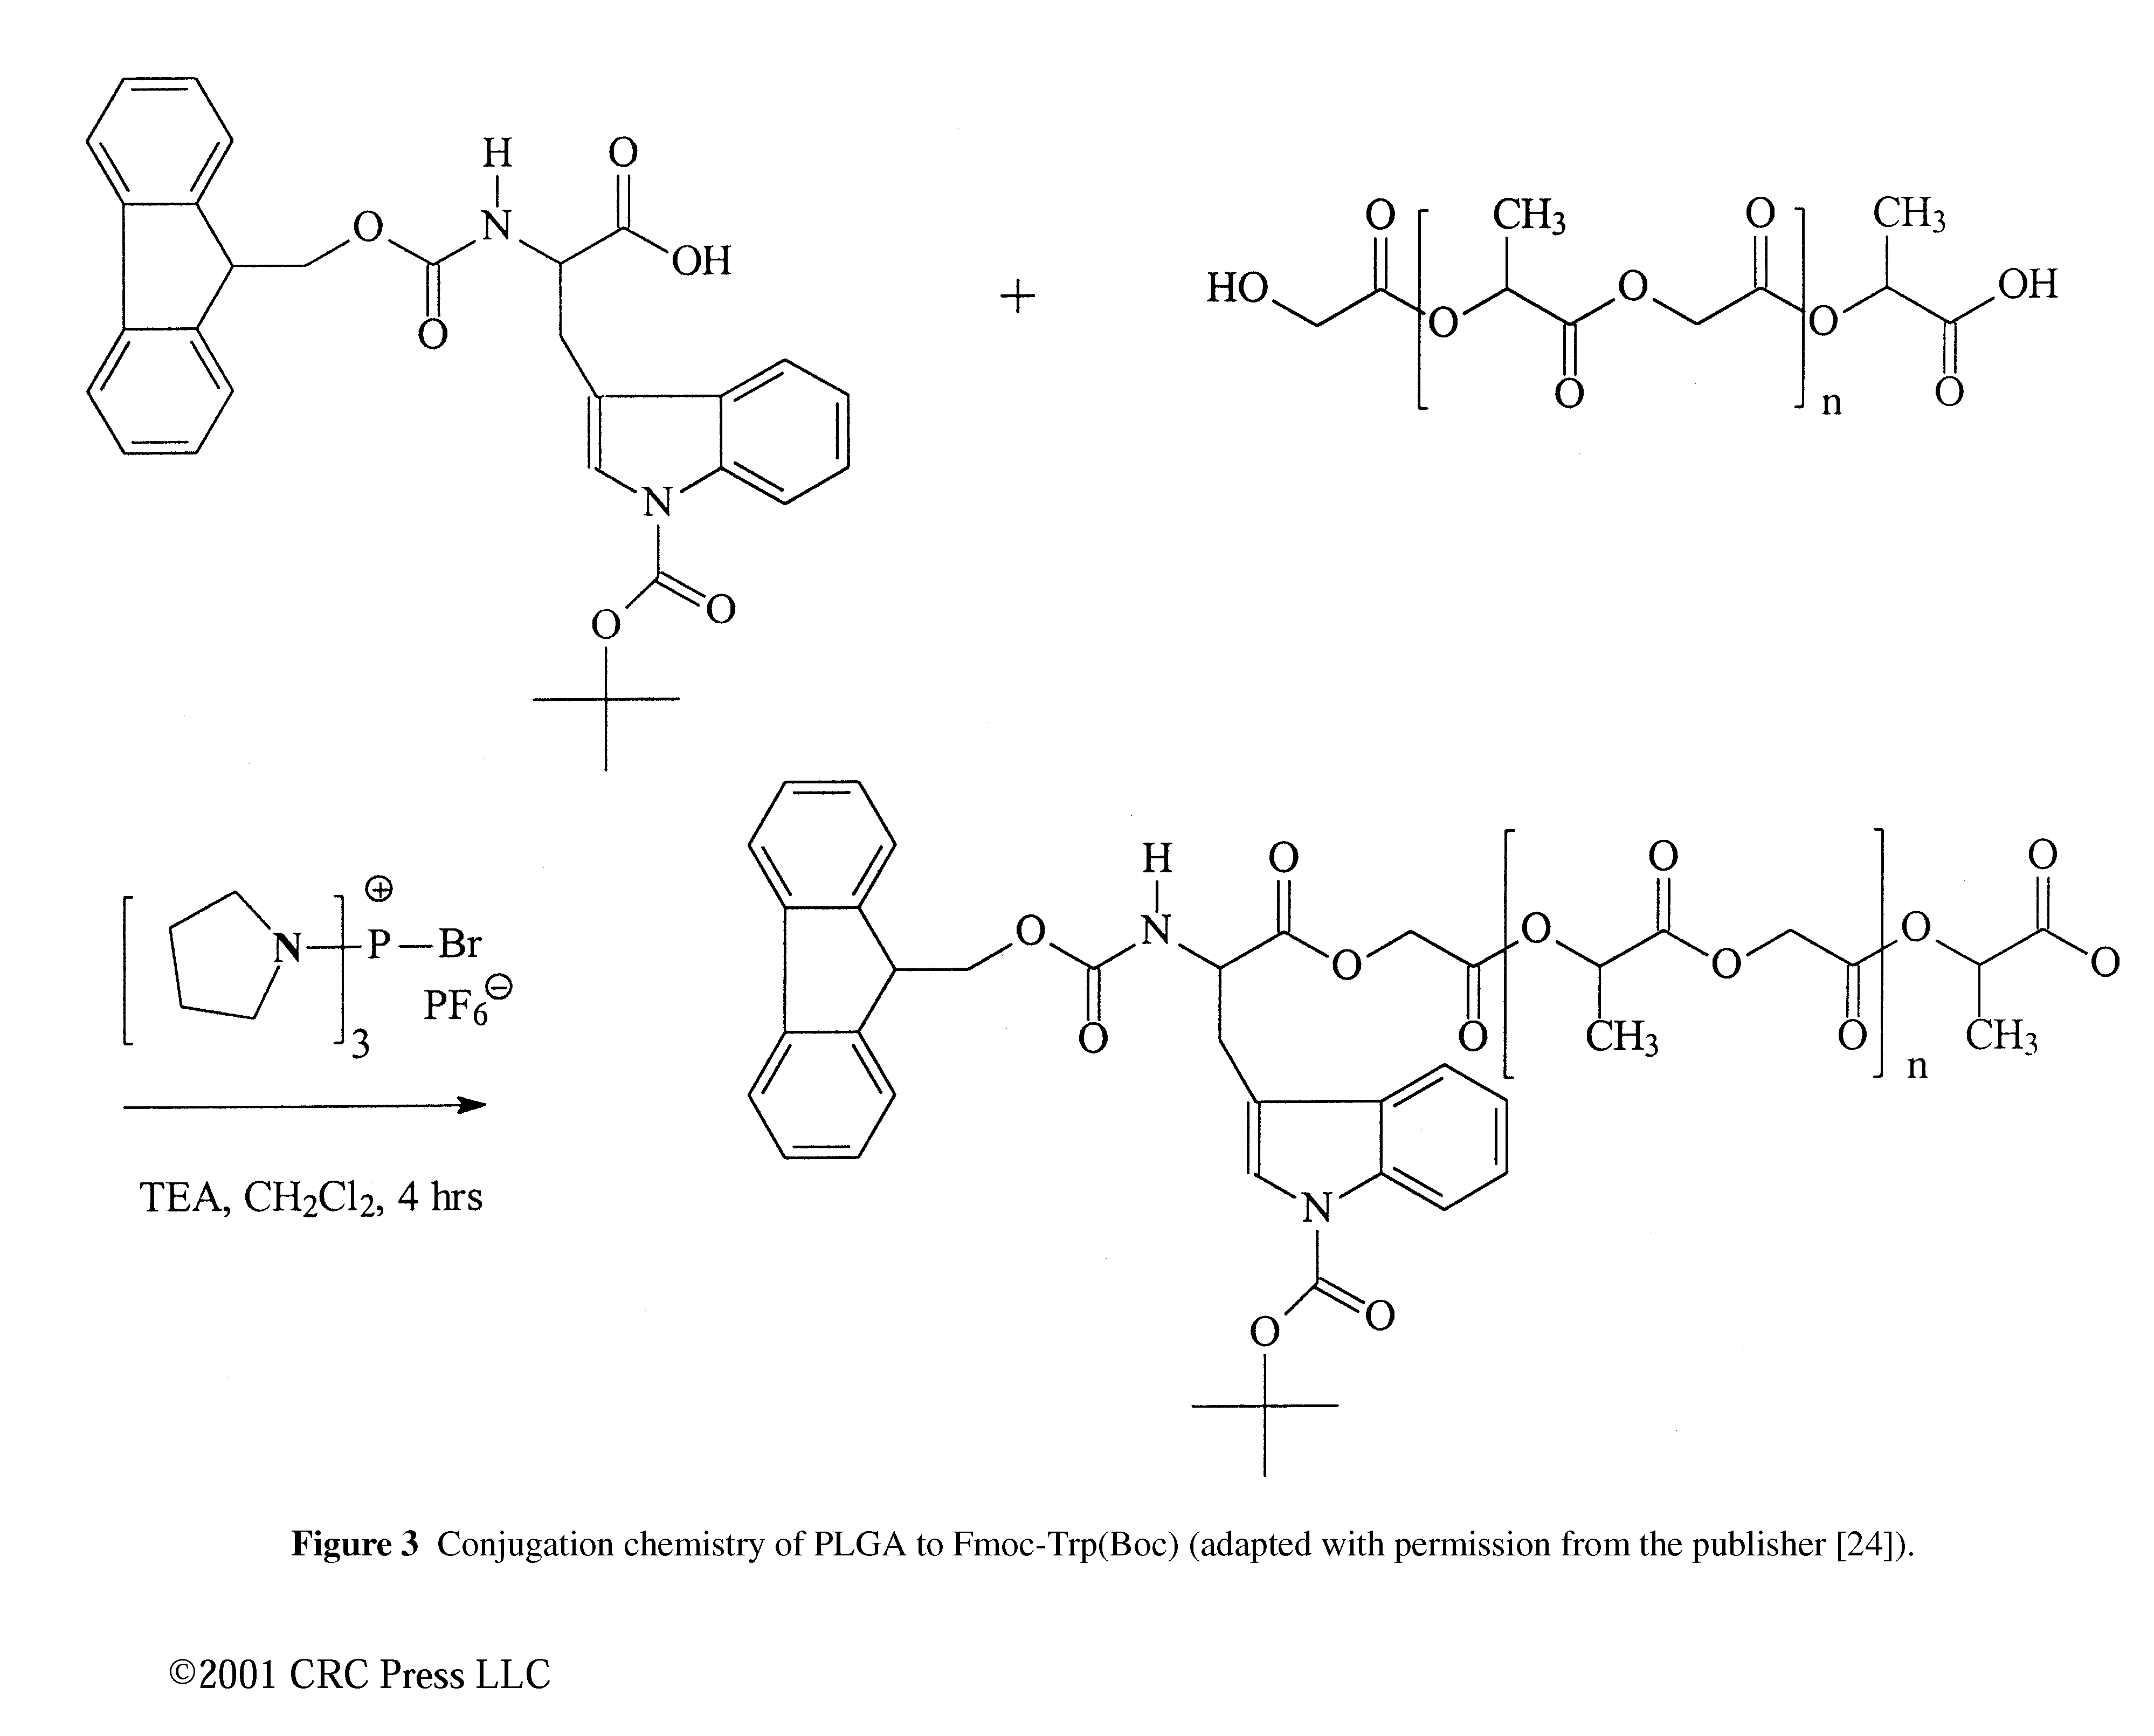 Figure 3 Conjugation chemistry of PLGA to Fmoc-Trp(Boc) (adapted with permission from the publisher [24]).